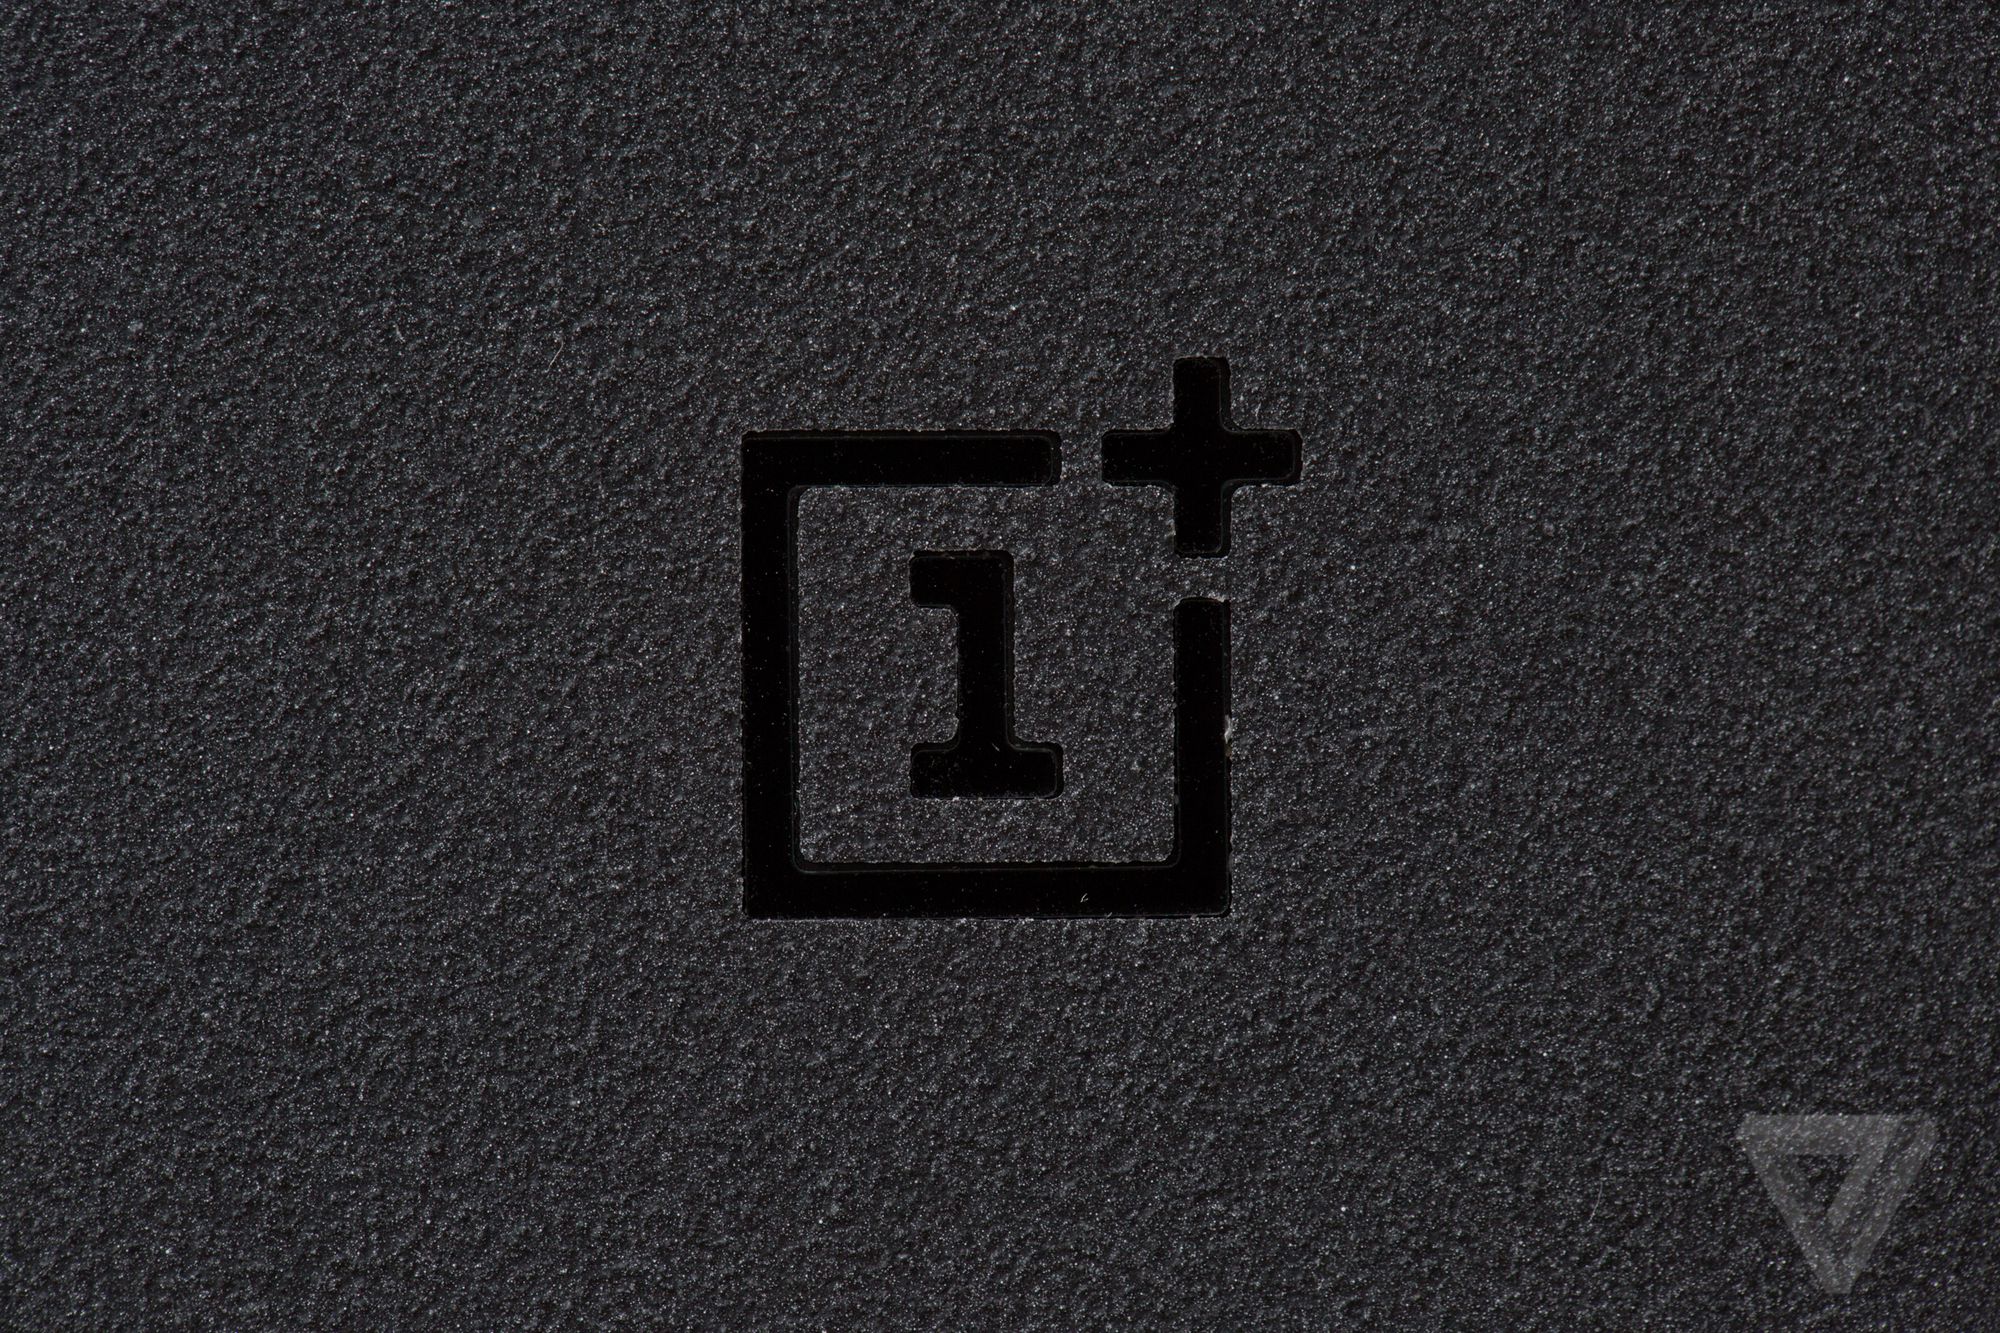 New OnePlus smartphone spotted in FCC filings - The Verge